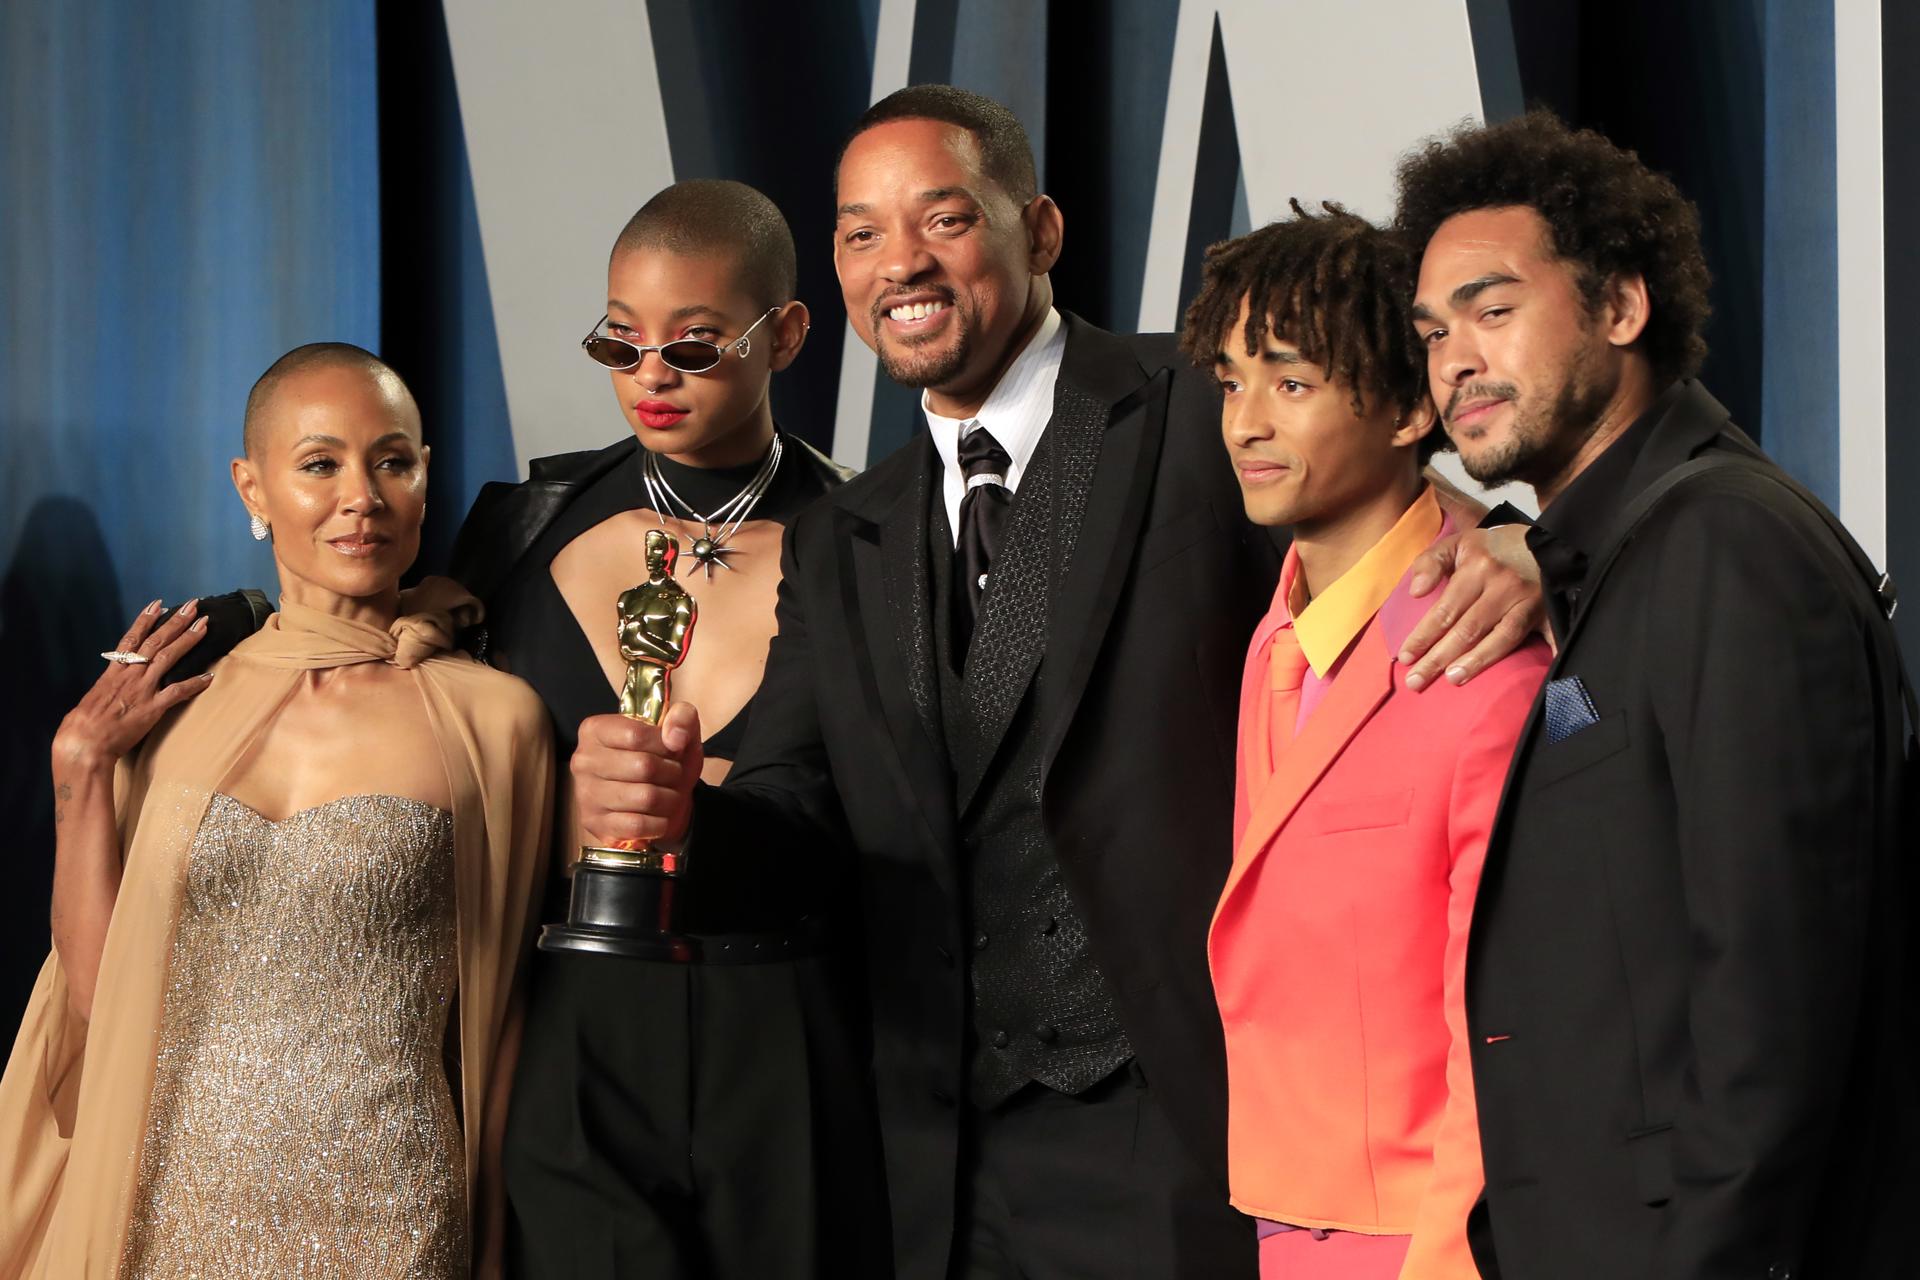 (L-R) Jada Pinkett-Smith, Willow Smith, Will Smith, Jaden Smith, Trey Smith pose at the 2022 Vanity Fair Oscar Party following the 94th annual Academy Awards ceremony, at the Wallis Annenberg Center for the Performing Arts in Beverly Hills, California, USA, 27 March 2022. EFE-EPA/NINA PROMMER/FILE